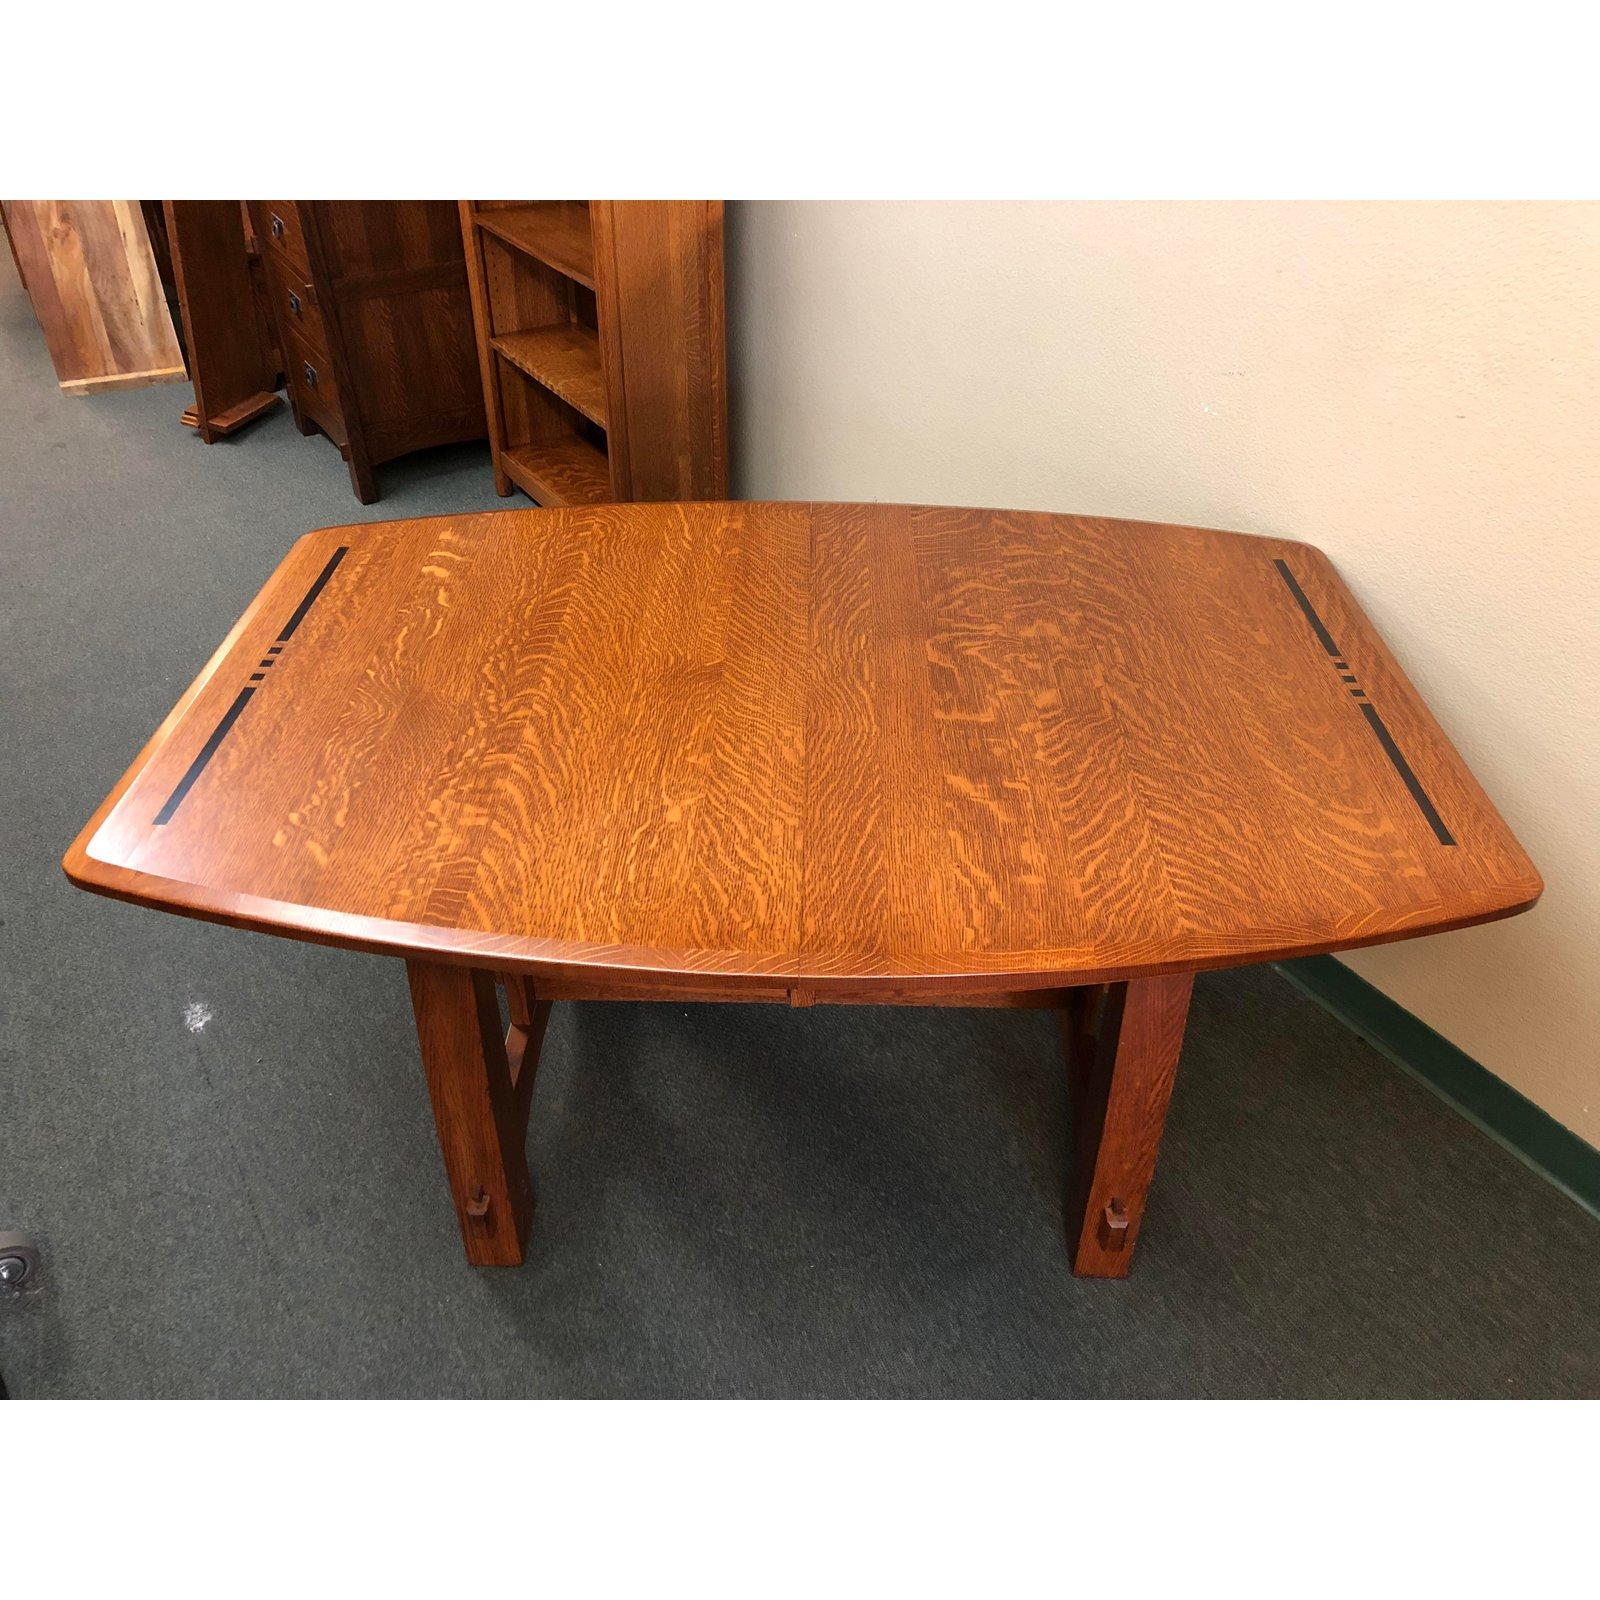 A Colebrook trestle table from The American Bungalow Collection by West Point. A fine Amish craftsmanship. The frame is white oak with a bowed surface shape with black inlays. The legs are curved with a cross inlayed lower support. Comes with one